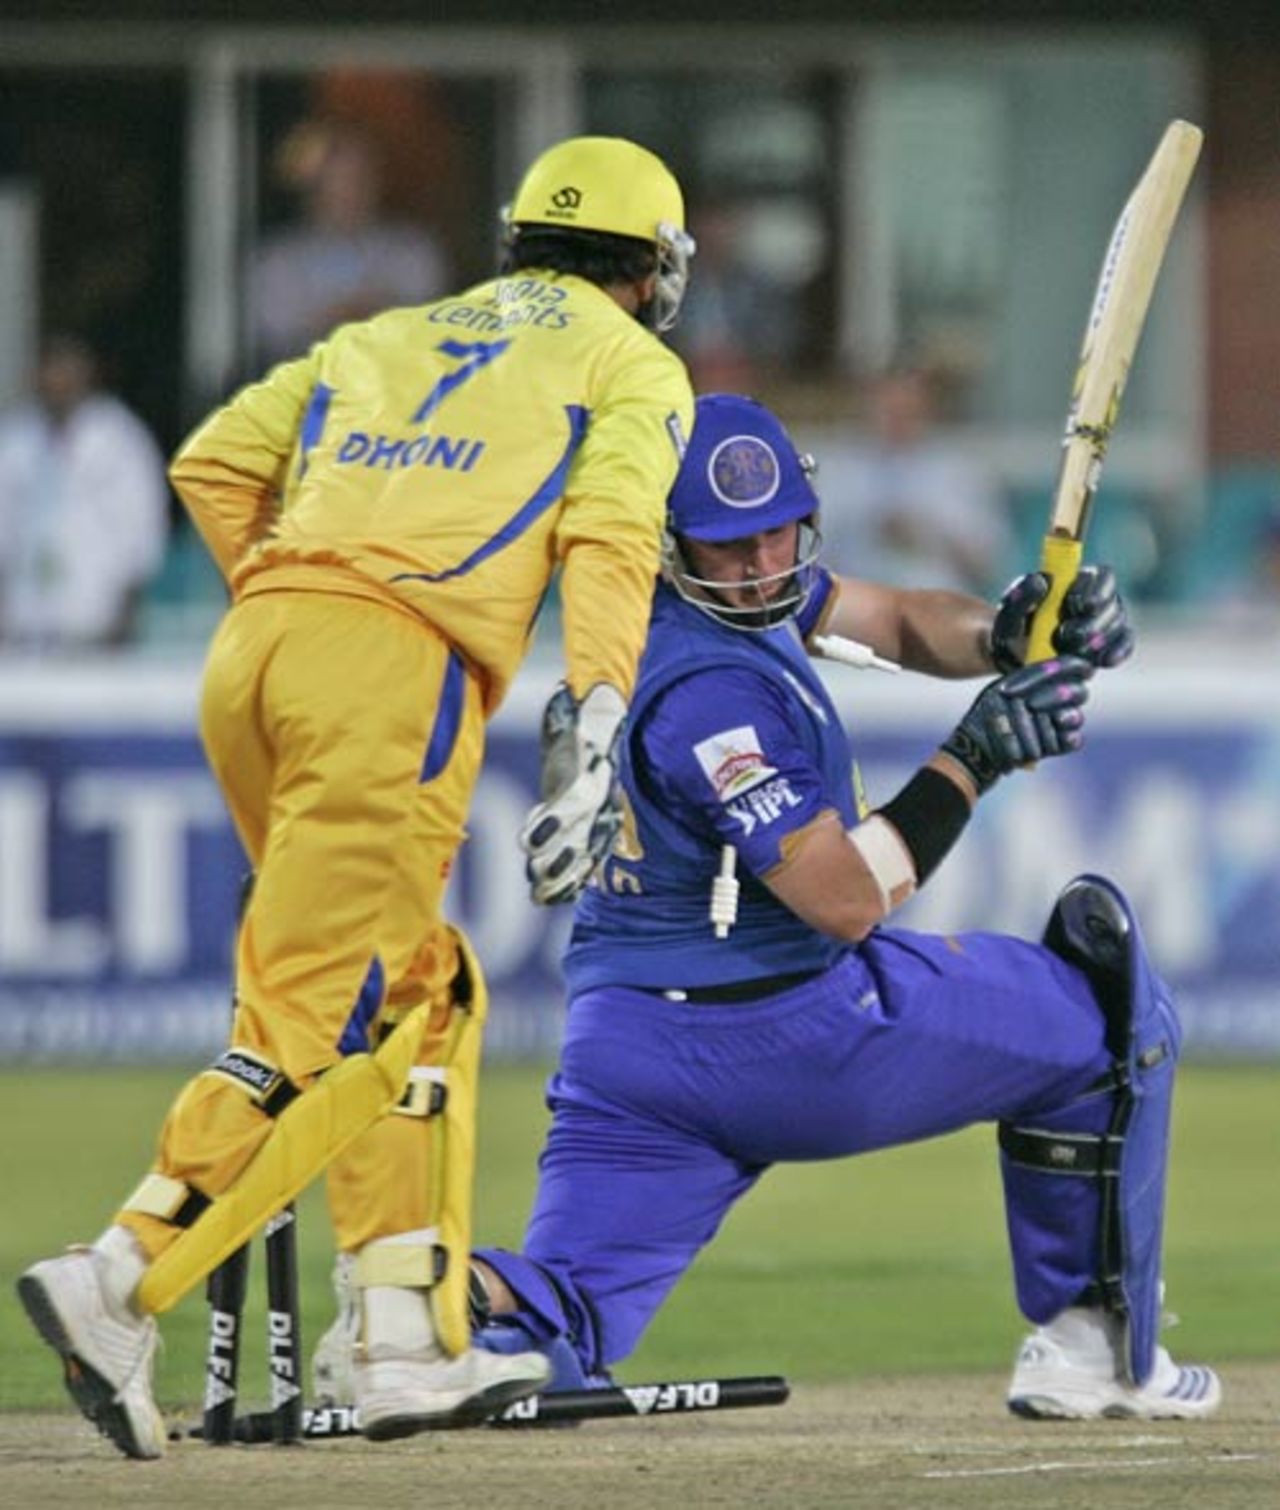 Graeme Smith looks back to find he is stumped by MS Dhoni, Chennai Super Kings v Rajasthan Royals, IPL, 37th match, Kimberley, May 9, 2009